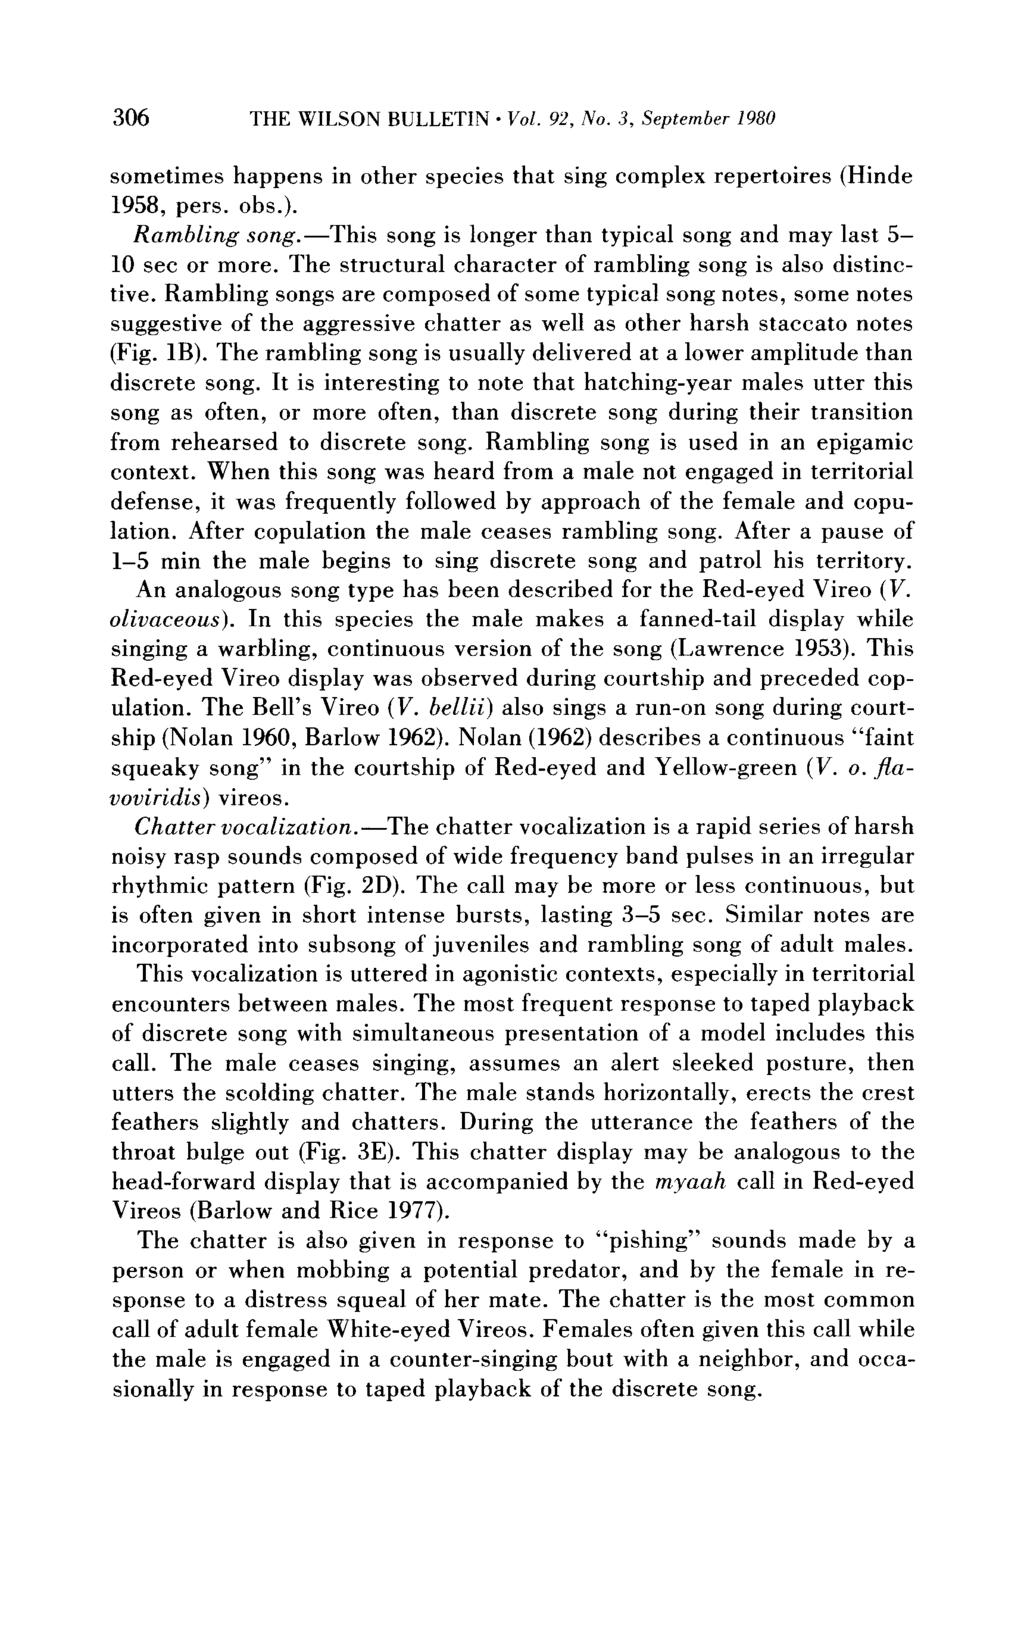 306 THE WILSON BULLETIN* Vol. 92,No. 3, September 1980 sometimes happens in other species that sing complex repertoires (Hinde 1958, pers. obs.). Rambling song.